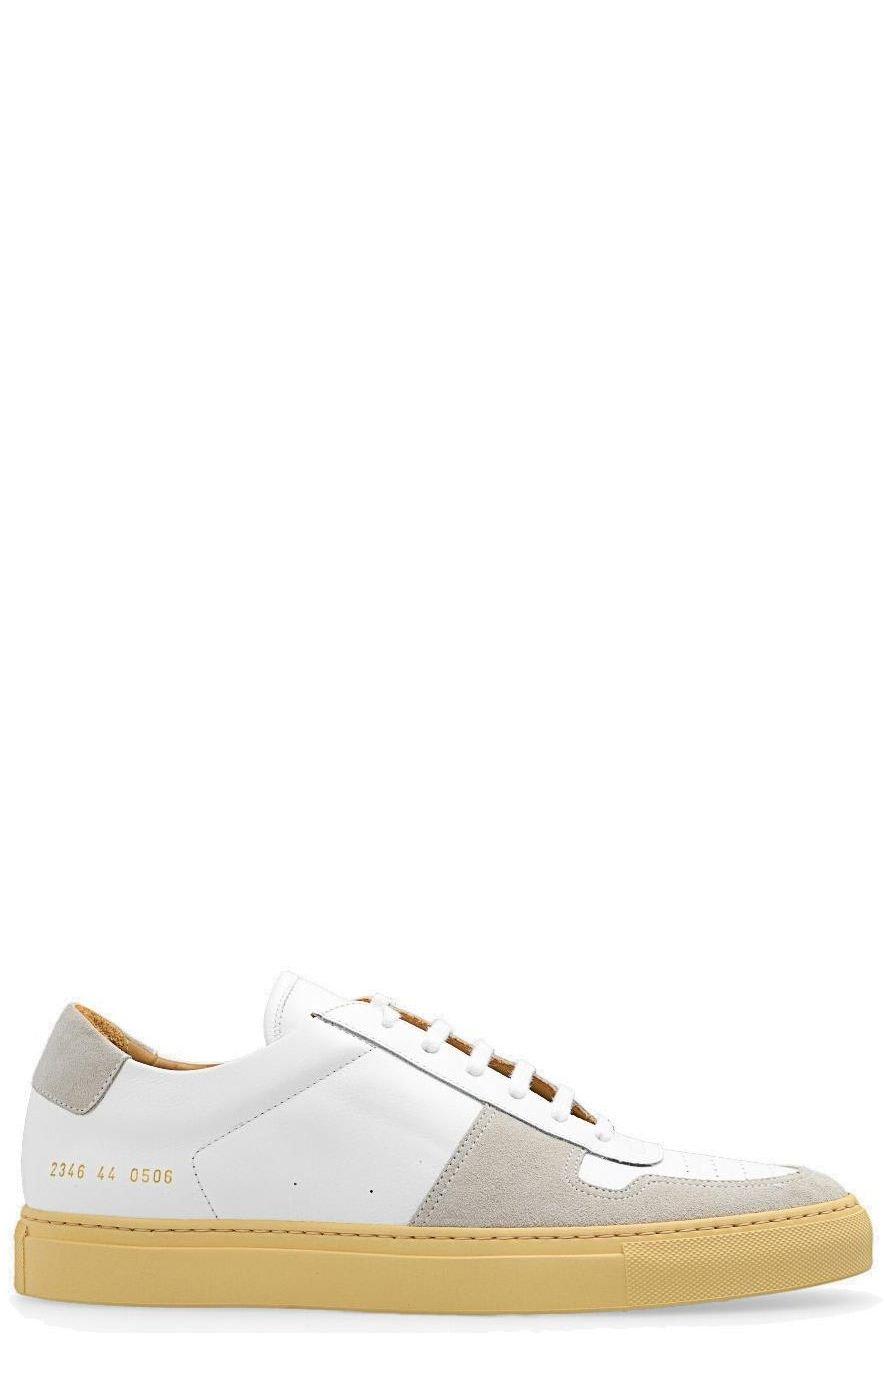 Common Projects Bball Panelled Low-top Sneakers